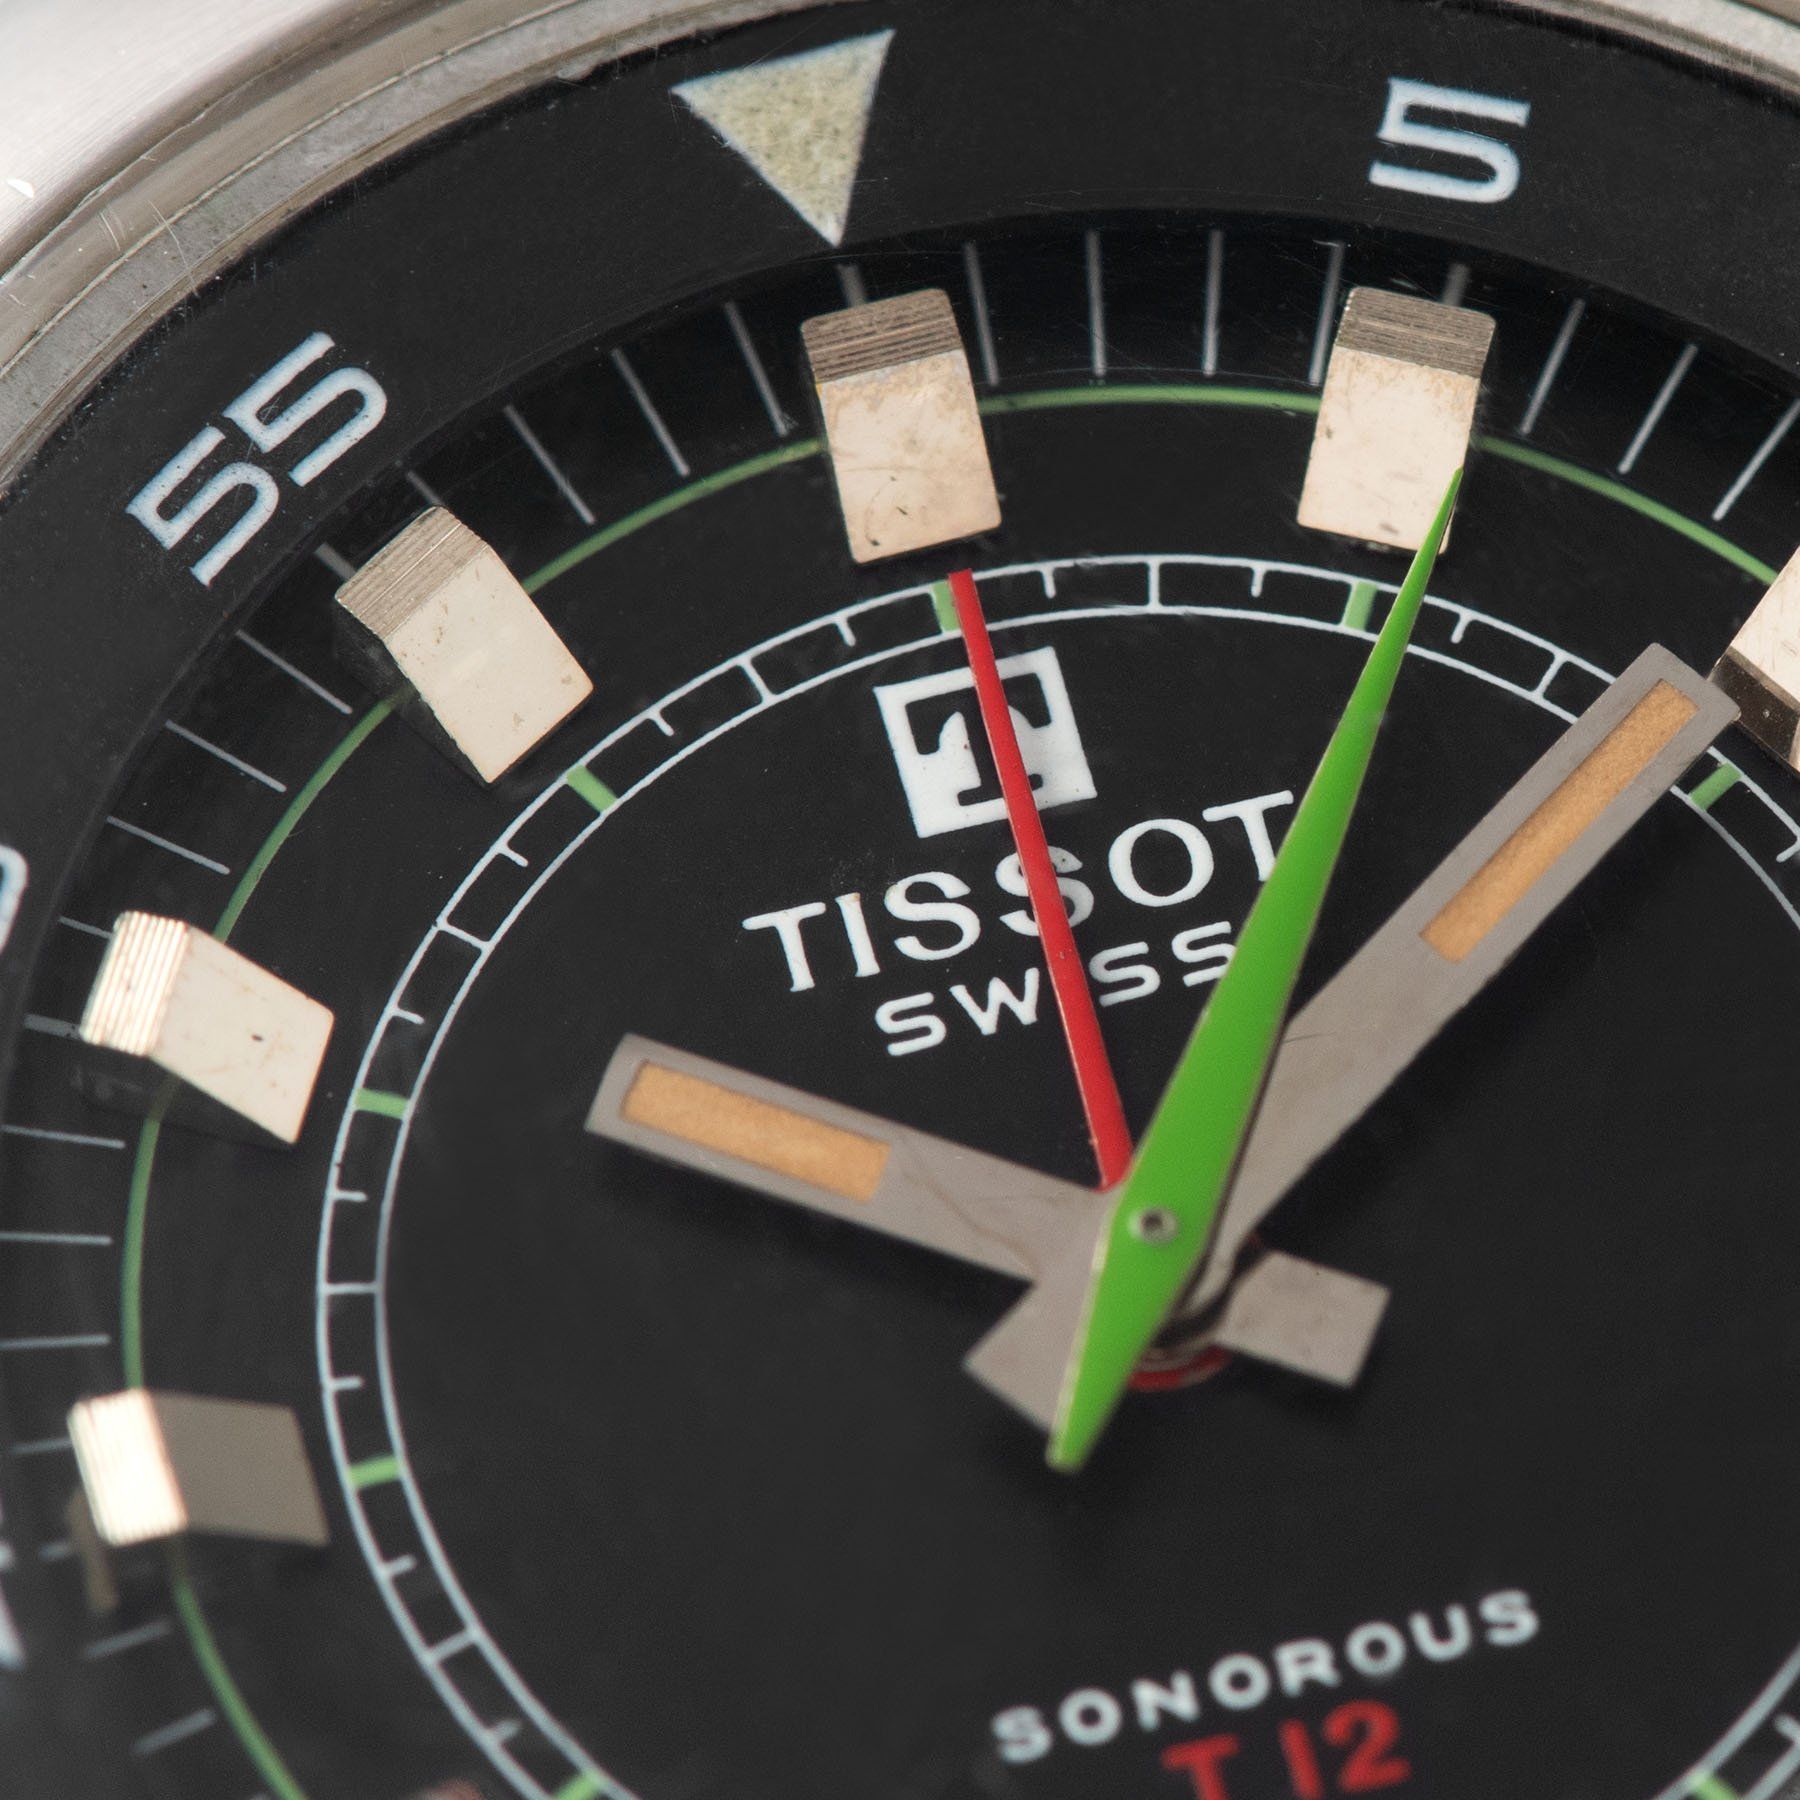 Tissot Sonorous Compressor Alarm Watch T12 4051 Green seconds and red alarm hands